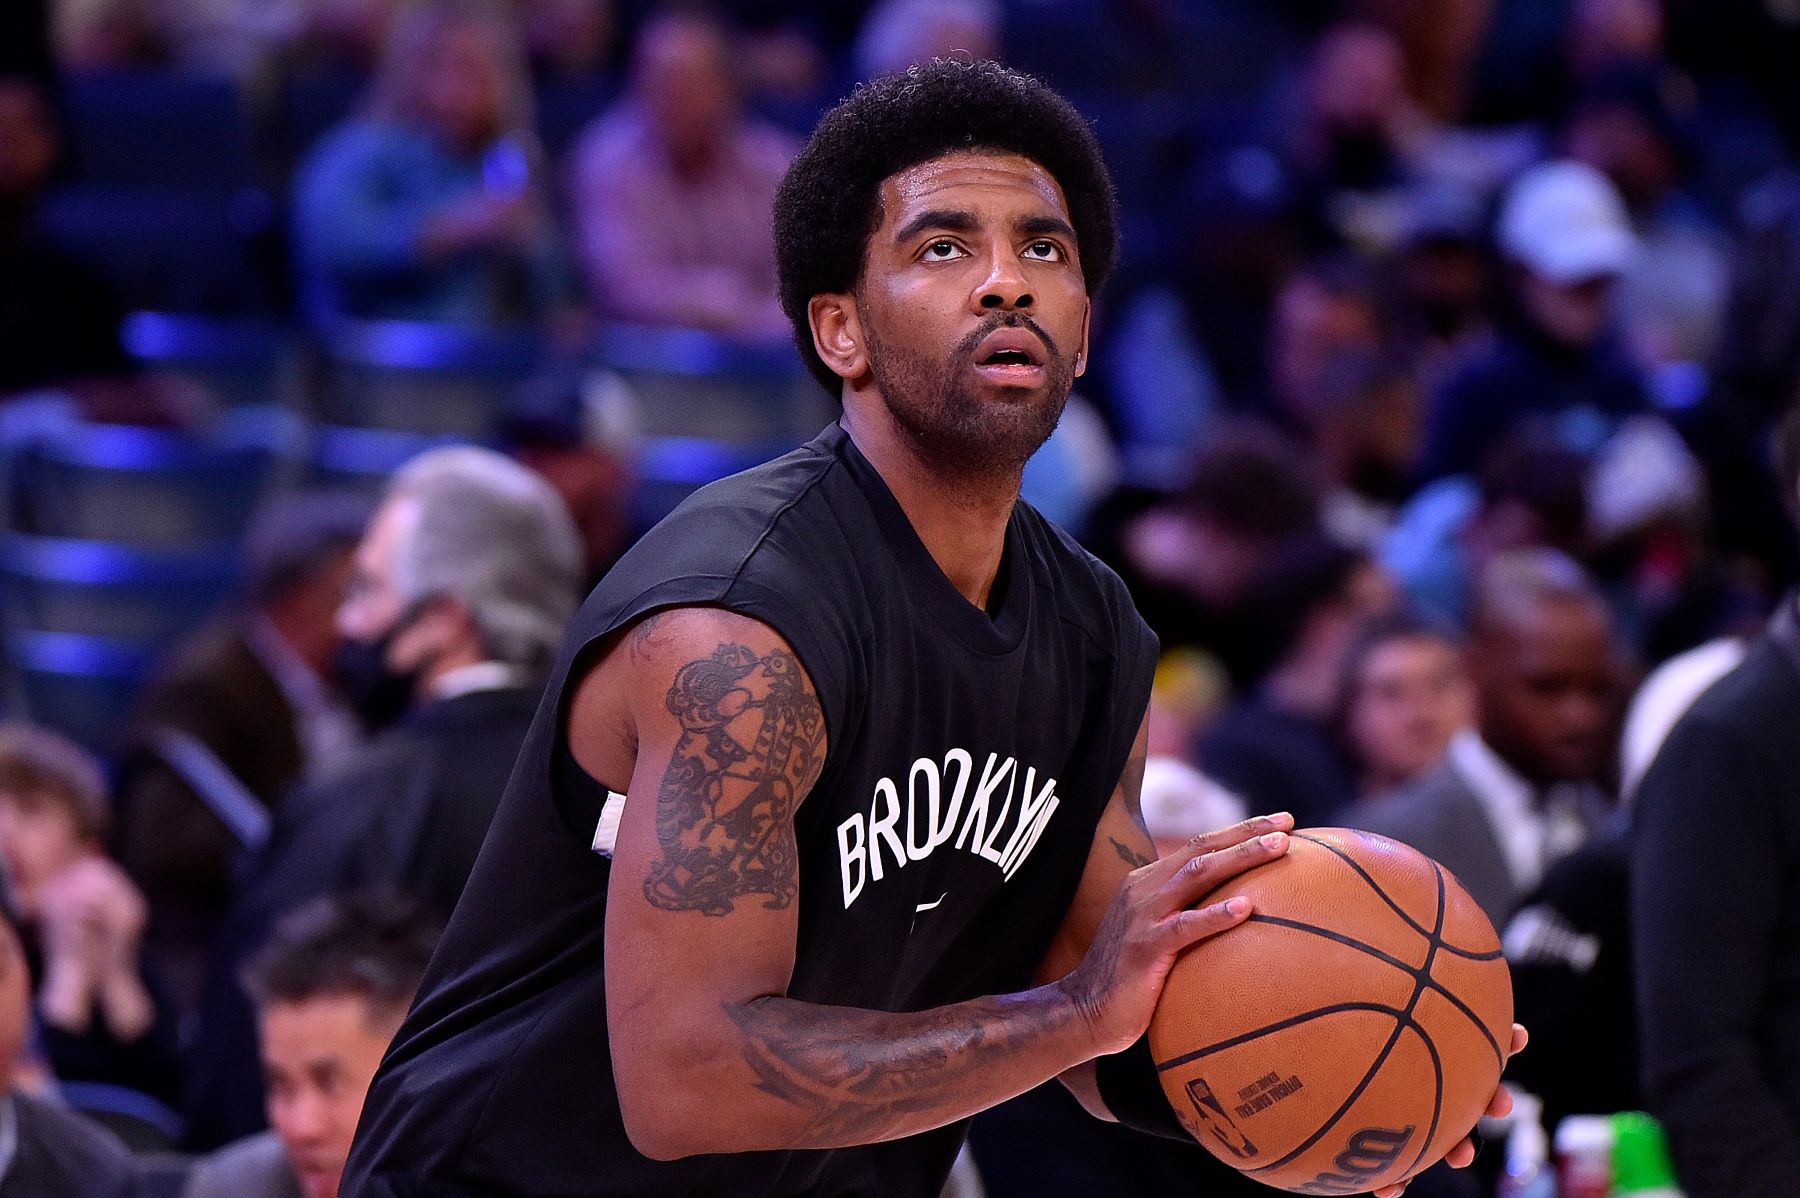 Kyrie Irving as #11 of the Brooklyn Nets NBA team during a game against the Memphis Grizzlies